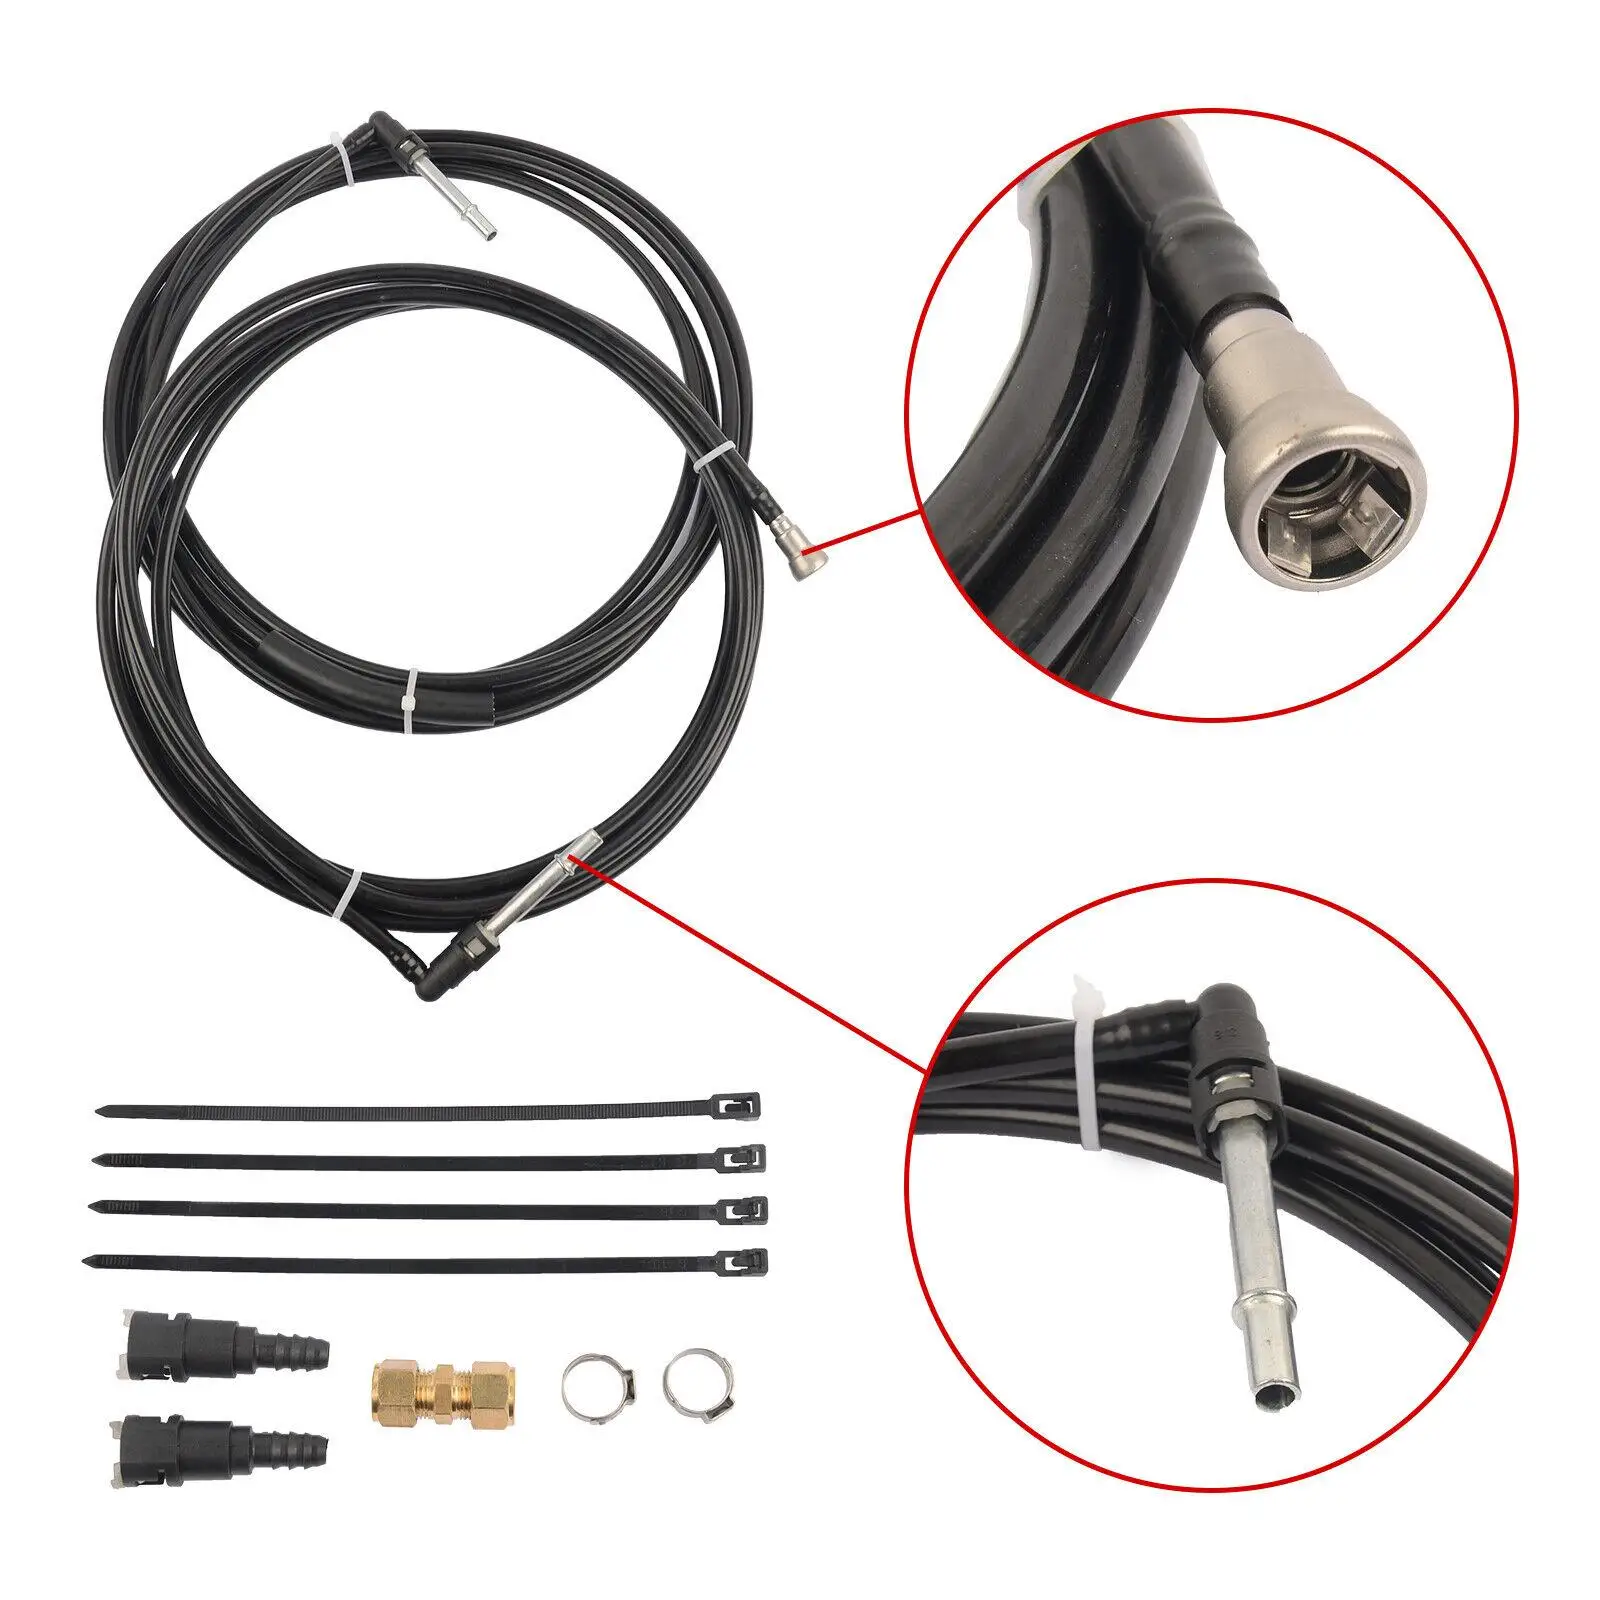 Fuel Lines Kit Flfg0340 Durable for Chevy Silverado GMC Sierra 1500 2500 3500 Vehicle Spare Parts Stable Performance